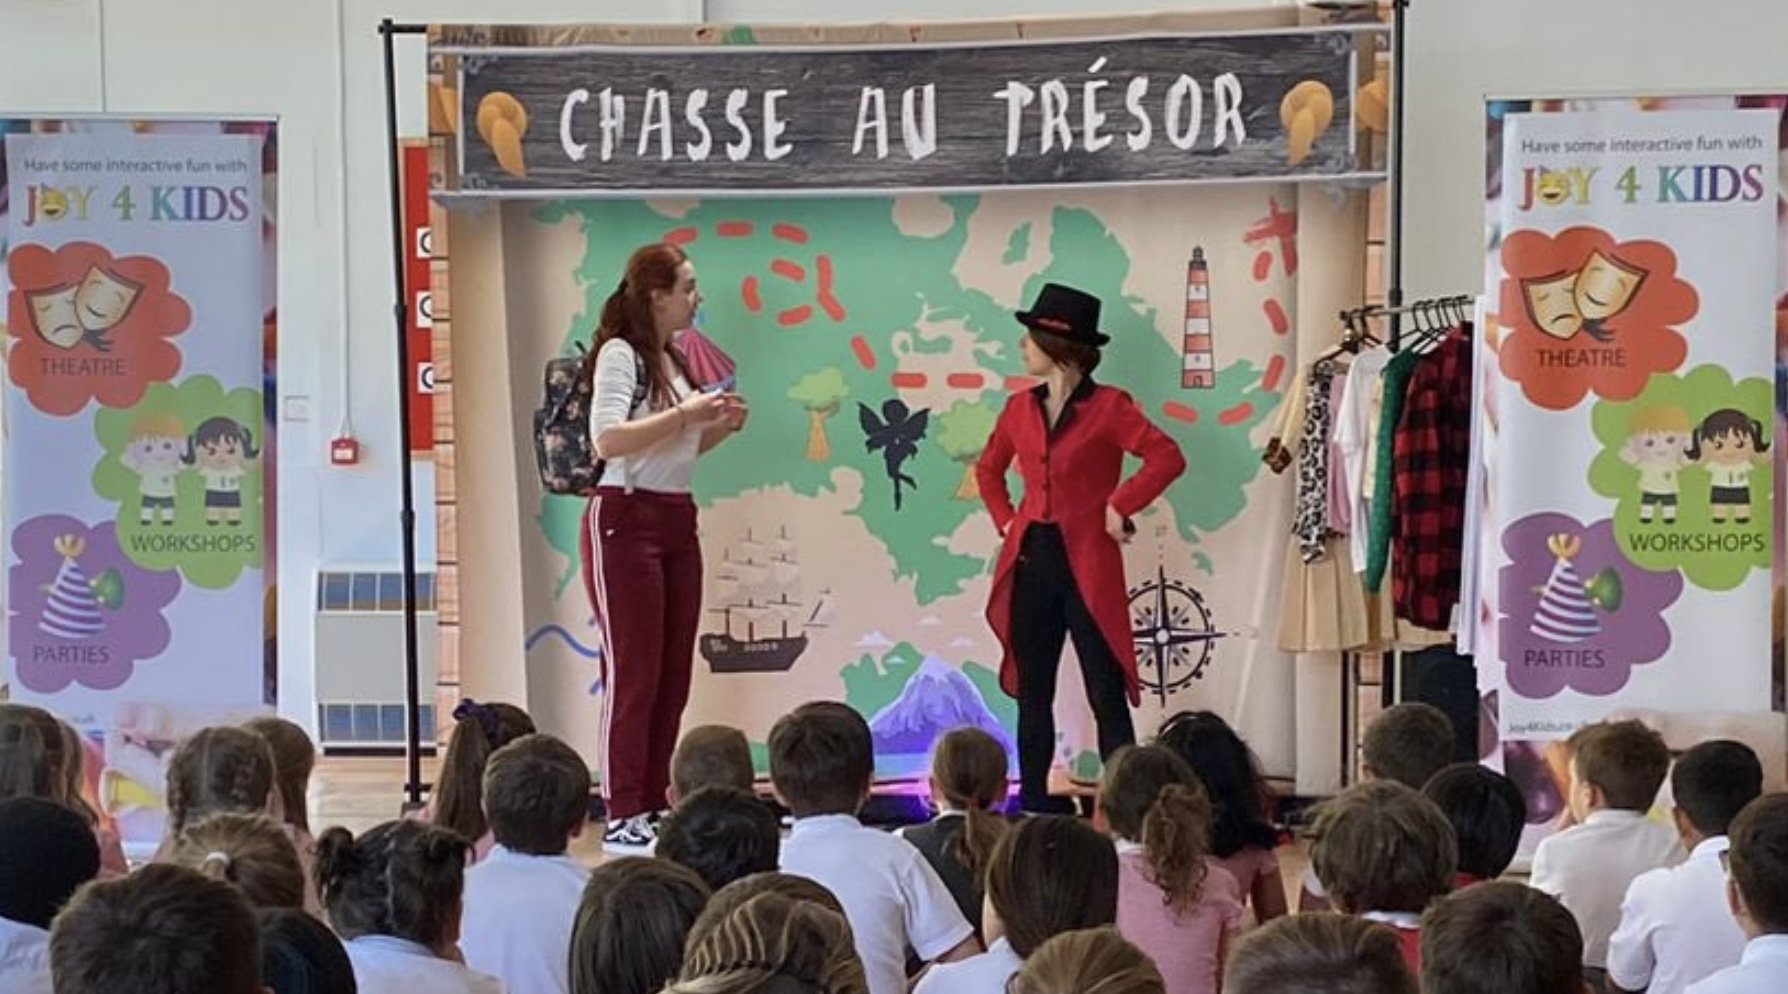 French theatre play touring in primary schools (South East UK)